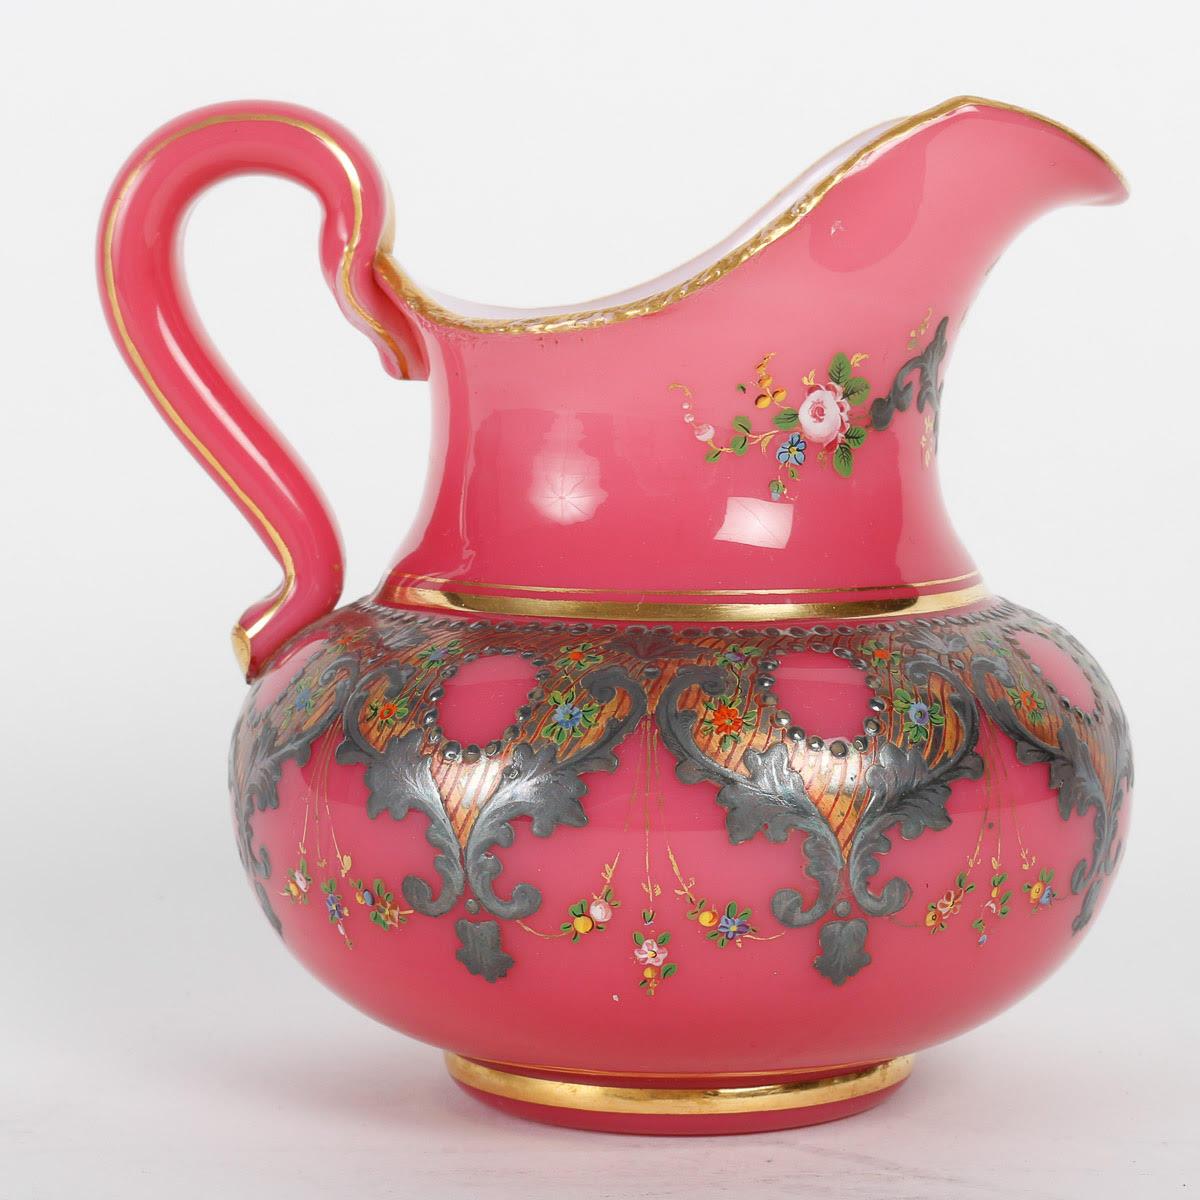 White and Pink Opaline Service Enamelled with Silver and Gold, 19th Century. 4